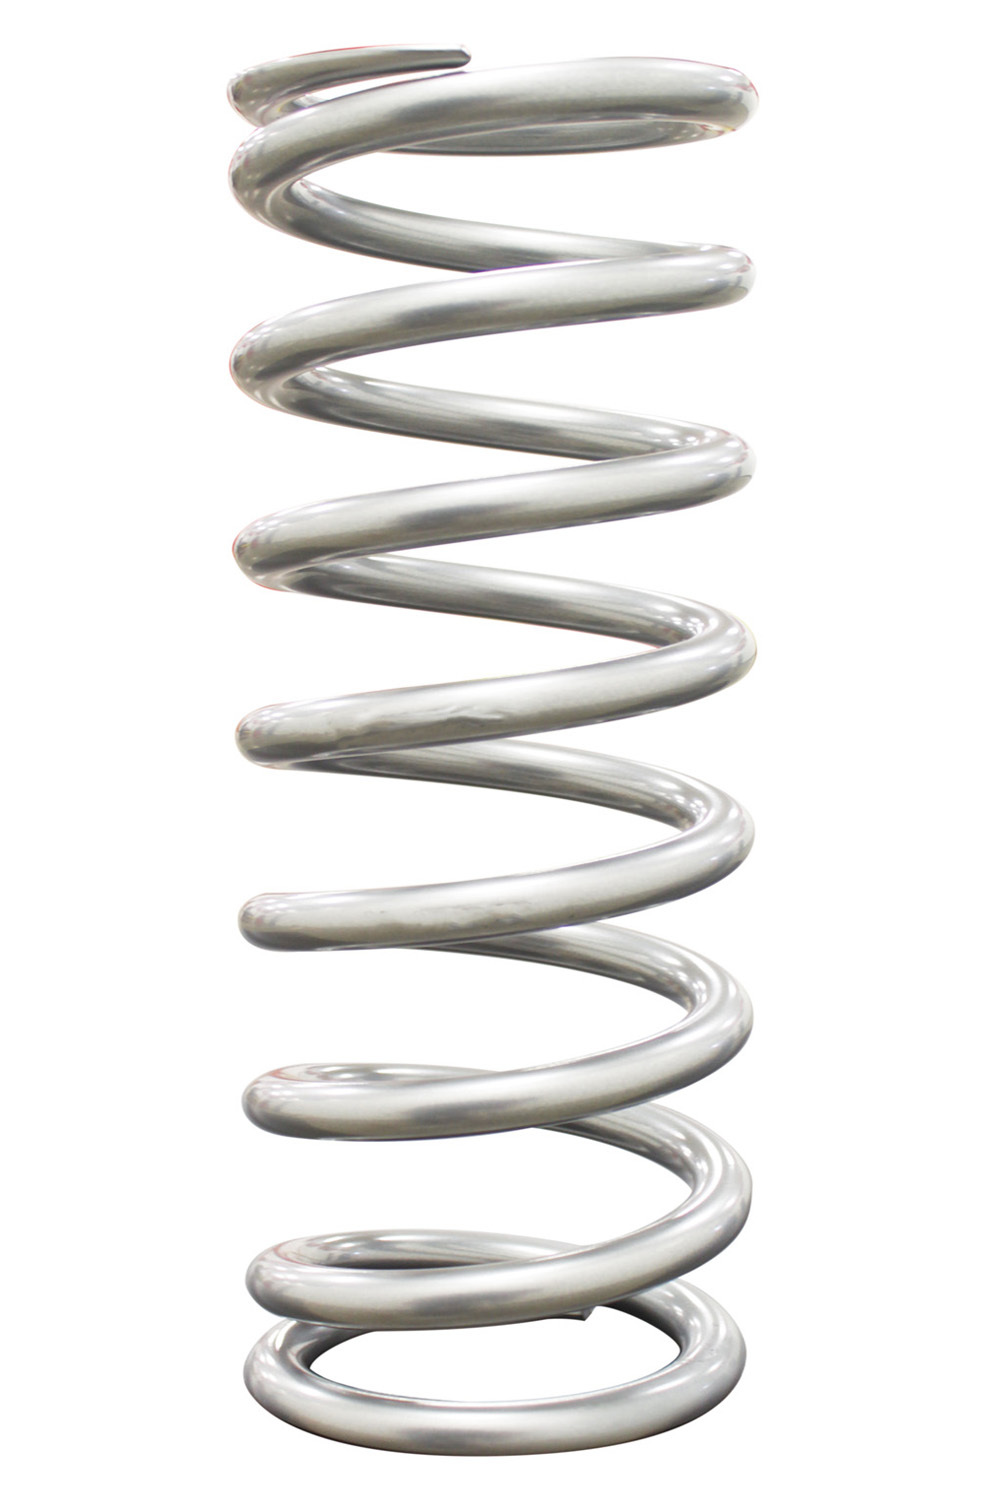 QA1 10HT125 Coil Spring, Coil-Over, 2.500 in ID, 10.000 in Length, 125 lb/in Spring Rate, Steel, Silver Powder Coat, Each